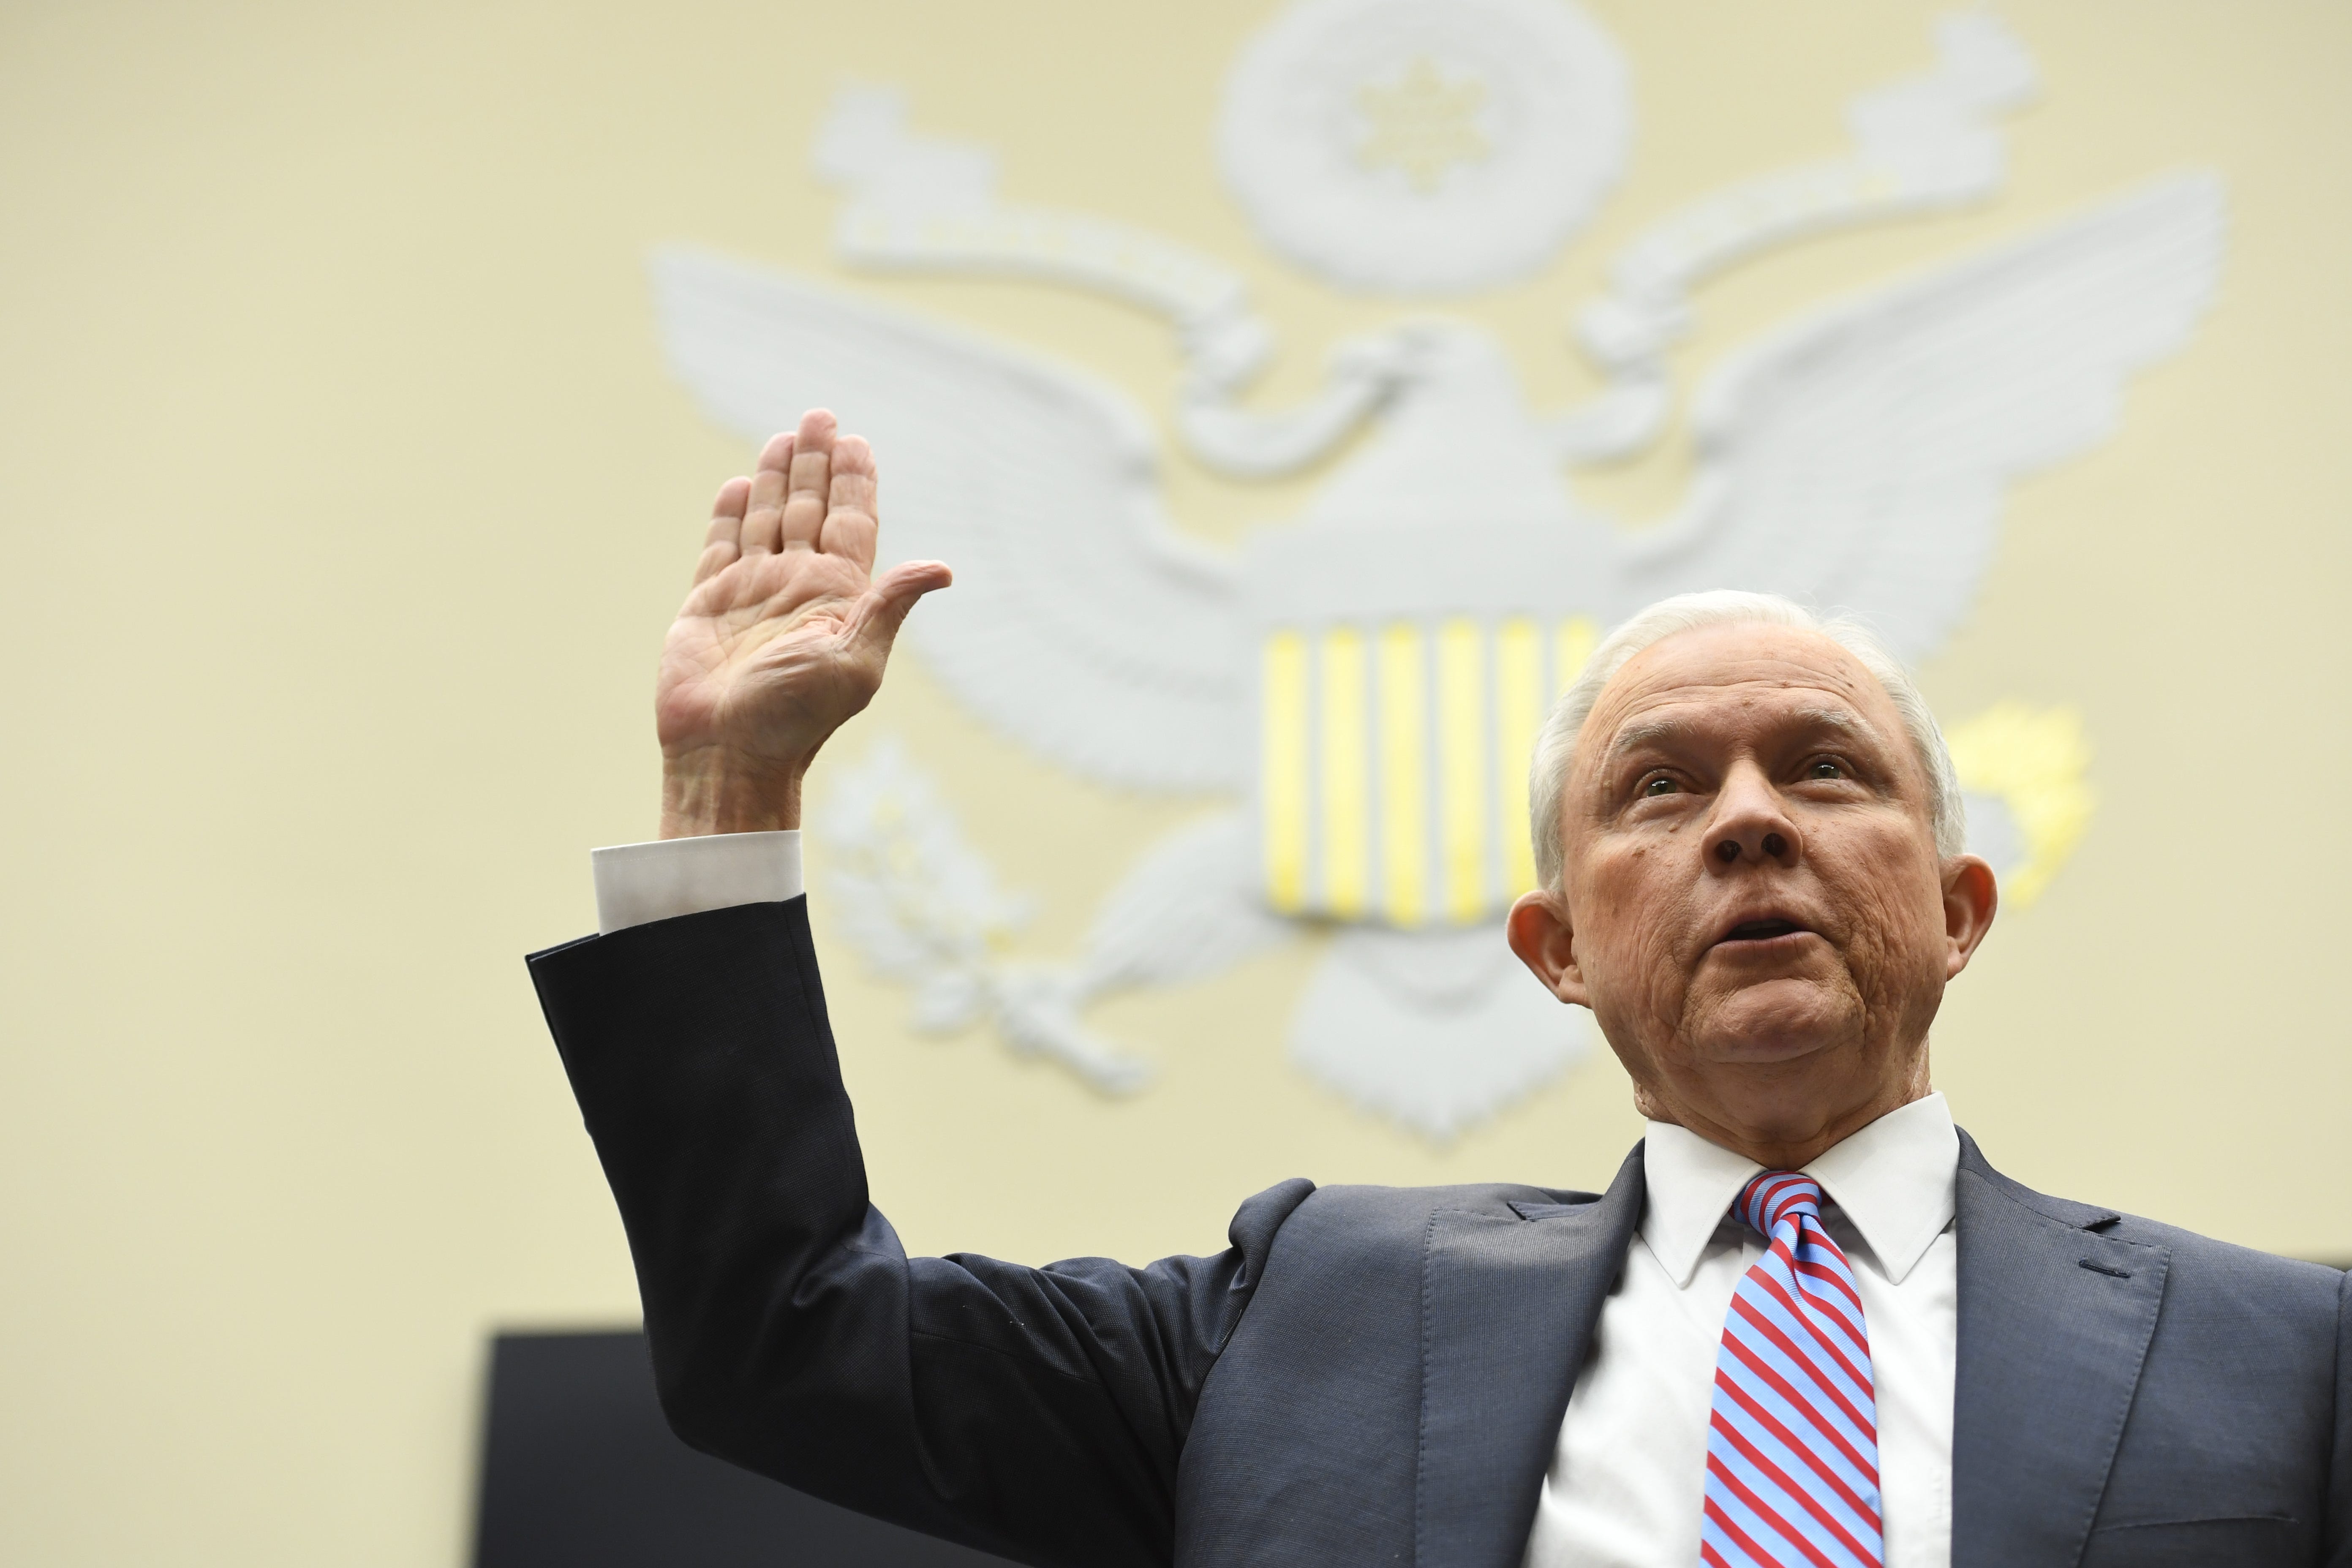 ksdk.com | Attorney General Jeff Sessions: 'I've always told the truth' about Trump ...5568 x 3712